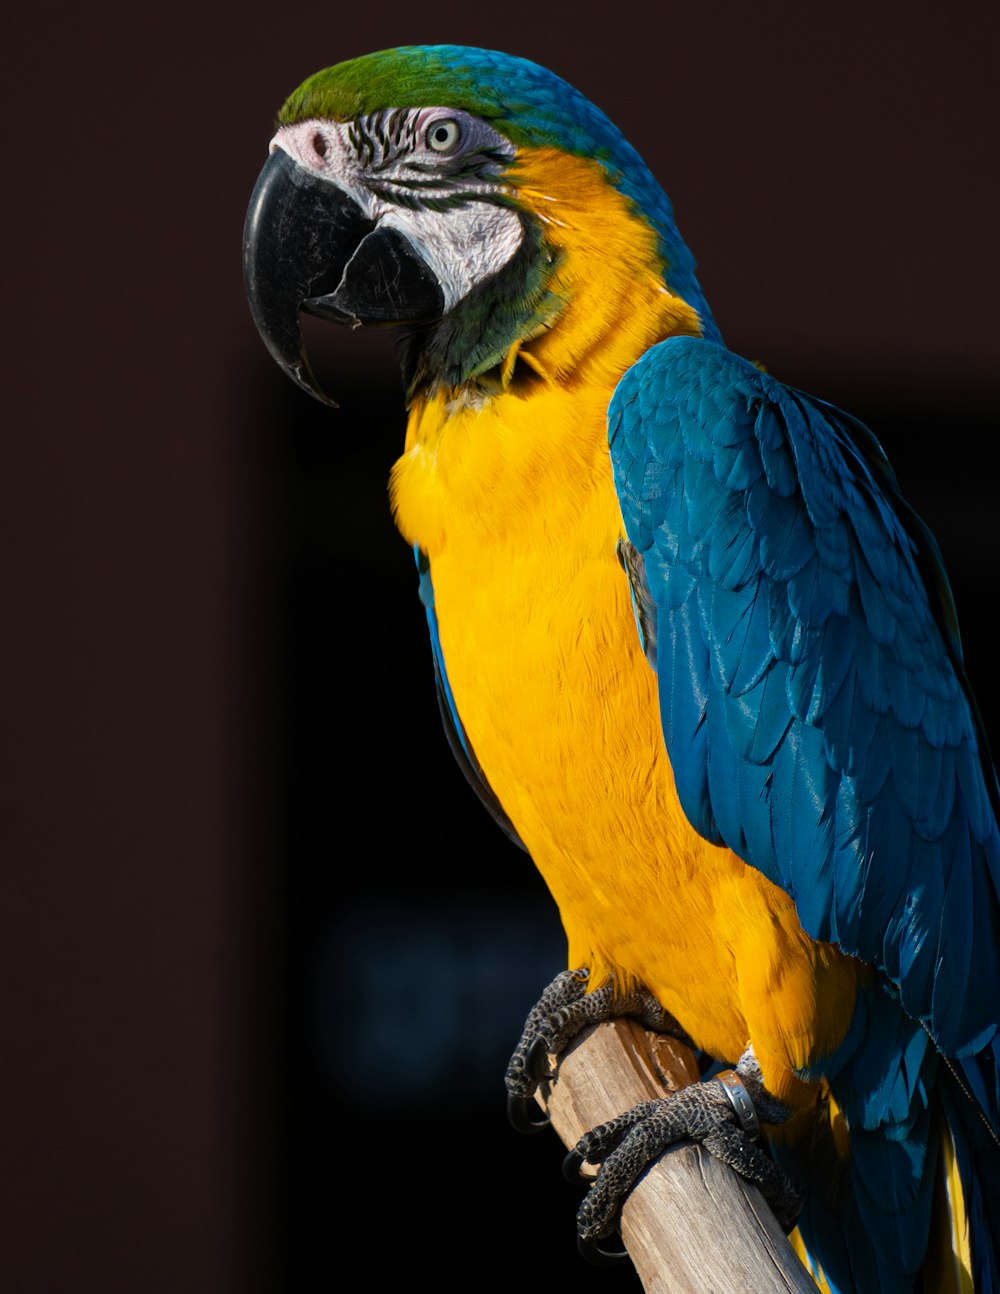 a blue and yellow parrot sitting on top of a wooden stick